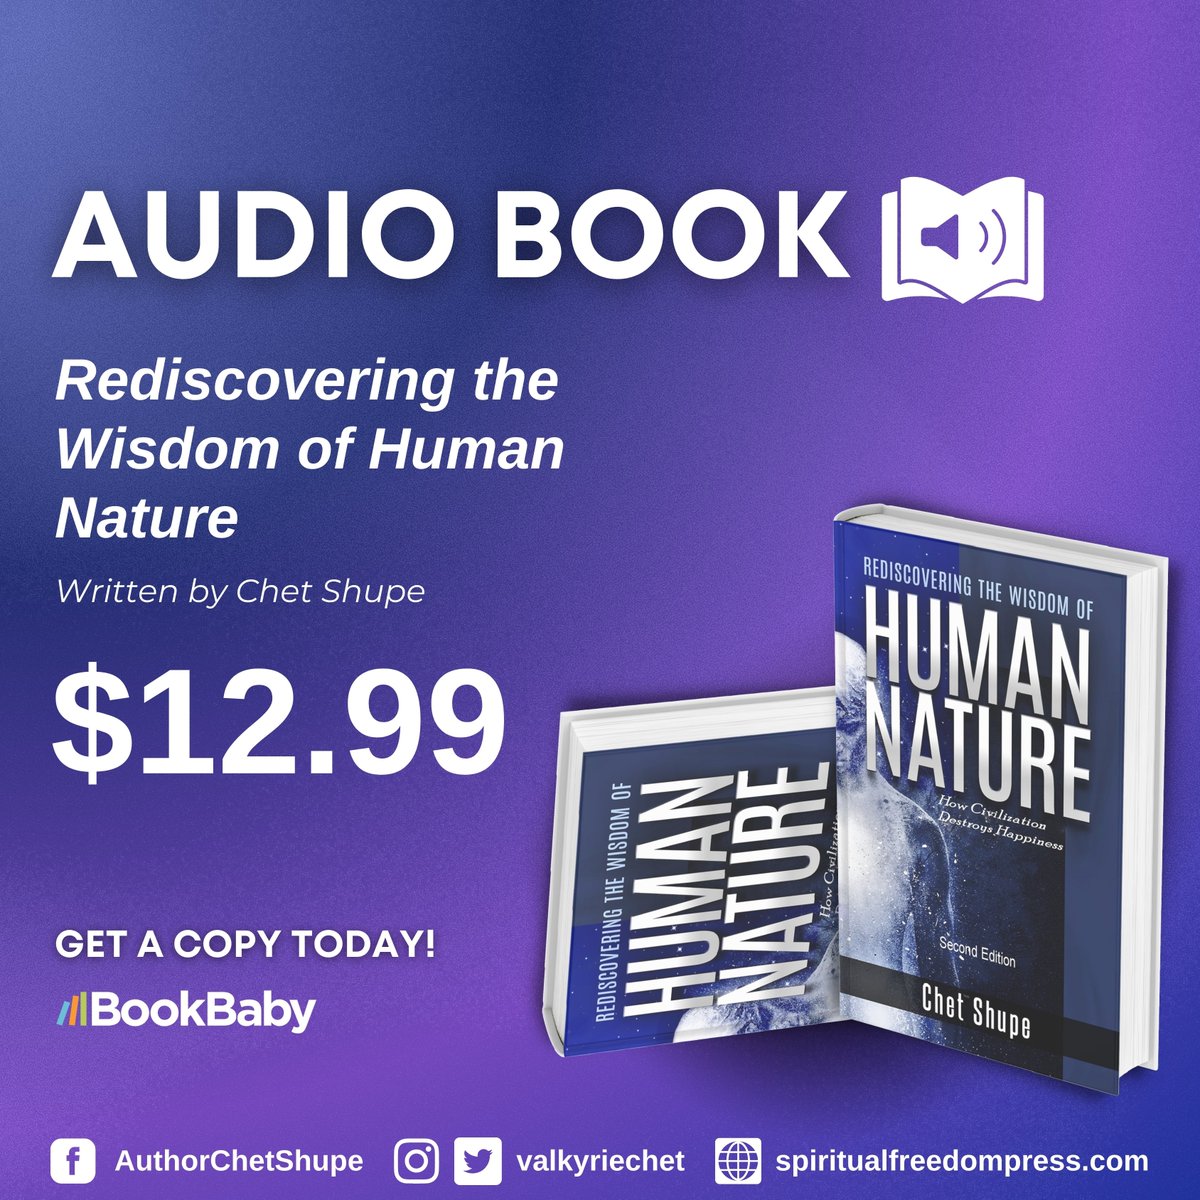 Hot off your headphones! 

Learn and grow with Chet Shupe wherever and whenever you are. Rediscovering the Wisdom of Human Nature now has an audiobook version available on BookBaby. Take a moment and listen to the vast wisdom the book equips you with.